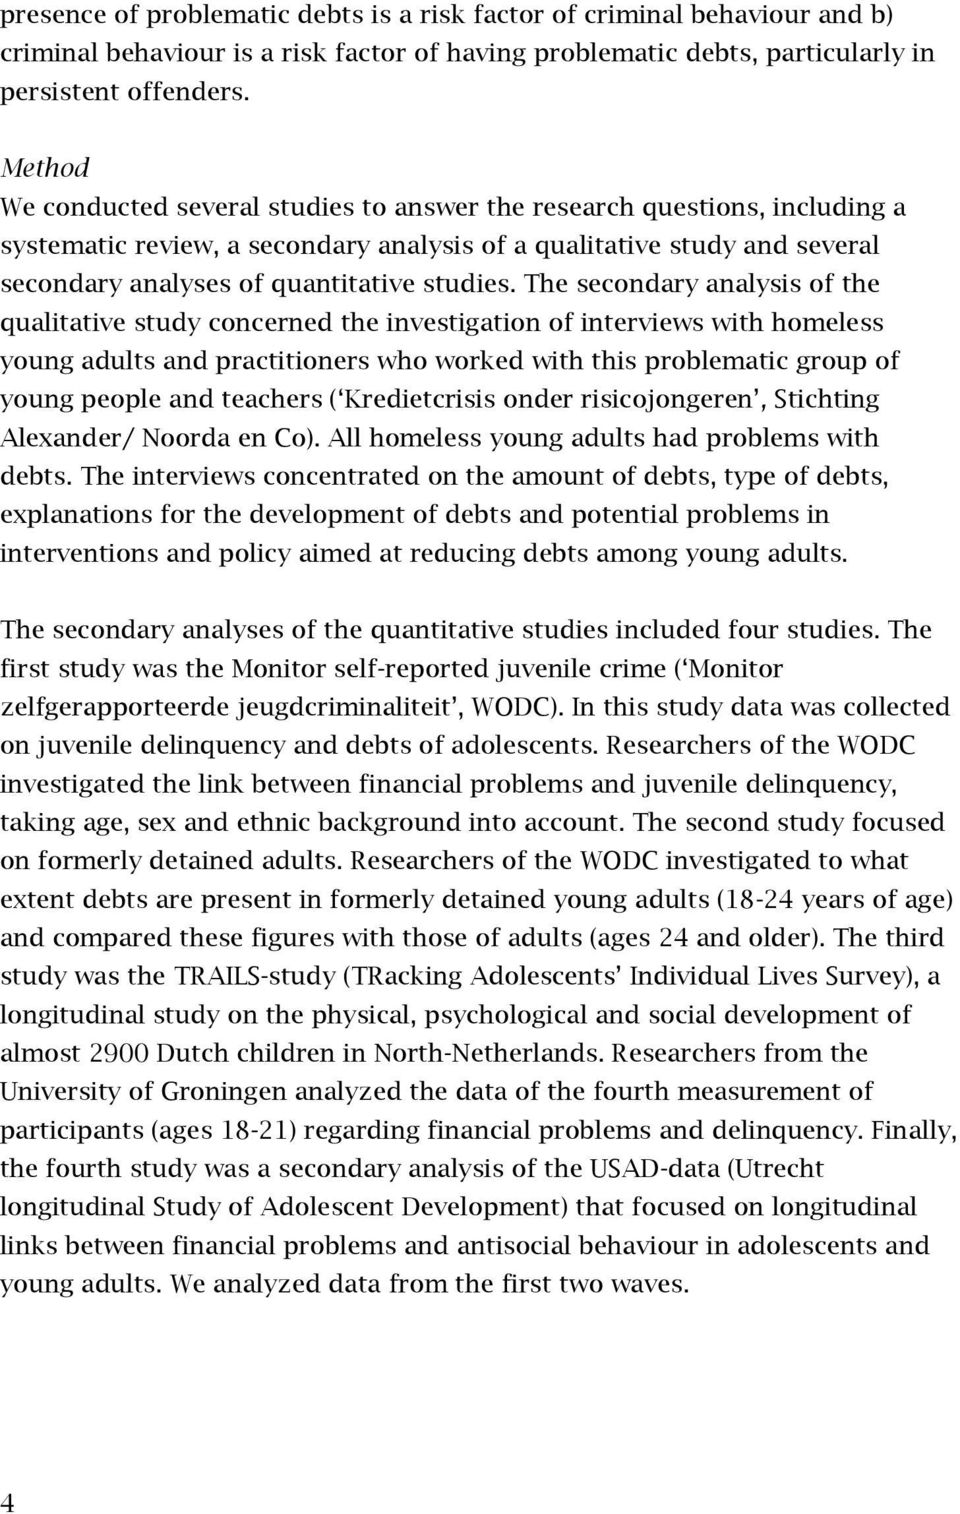 The secondary analysis of the qualitative study concerned the investigation of interviews with homeless young adults and practitioners who worked with this problematic group of young people and